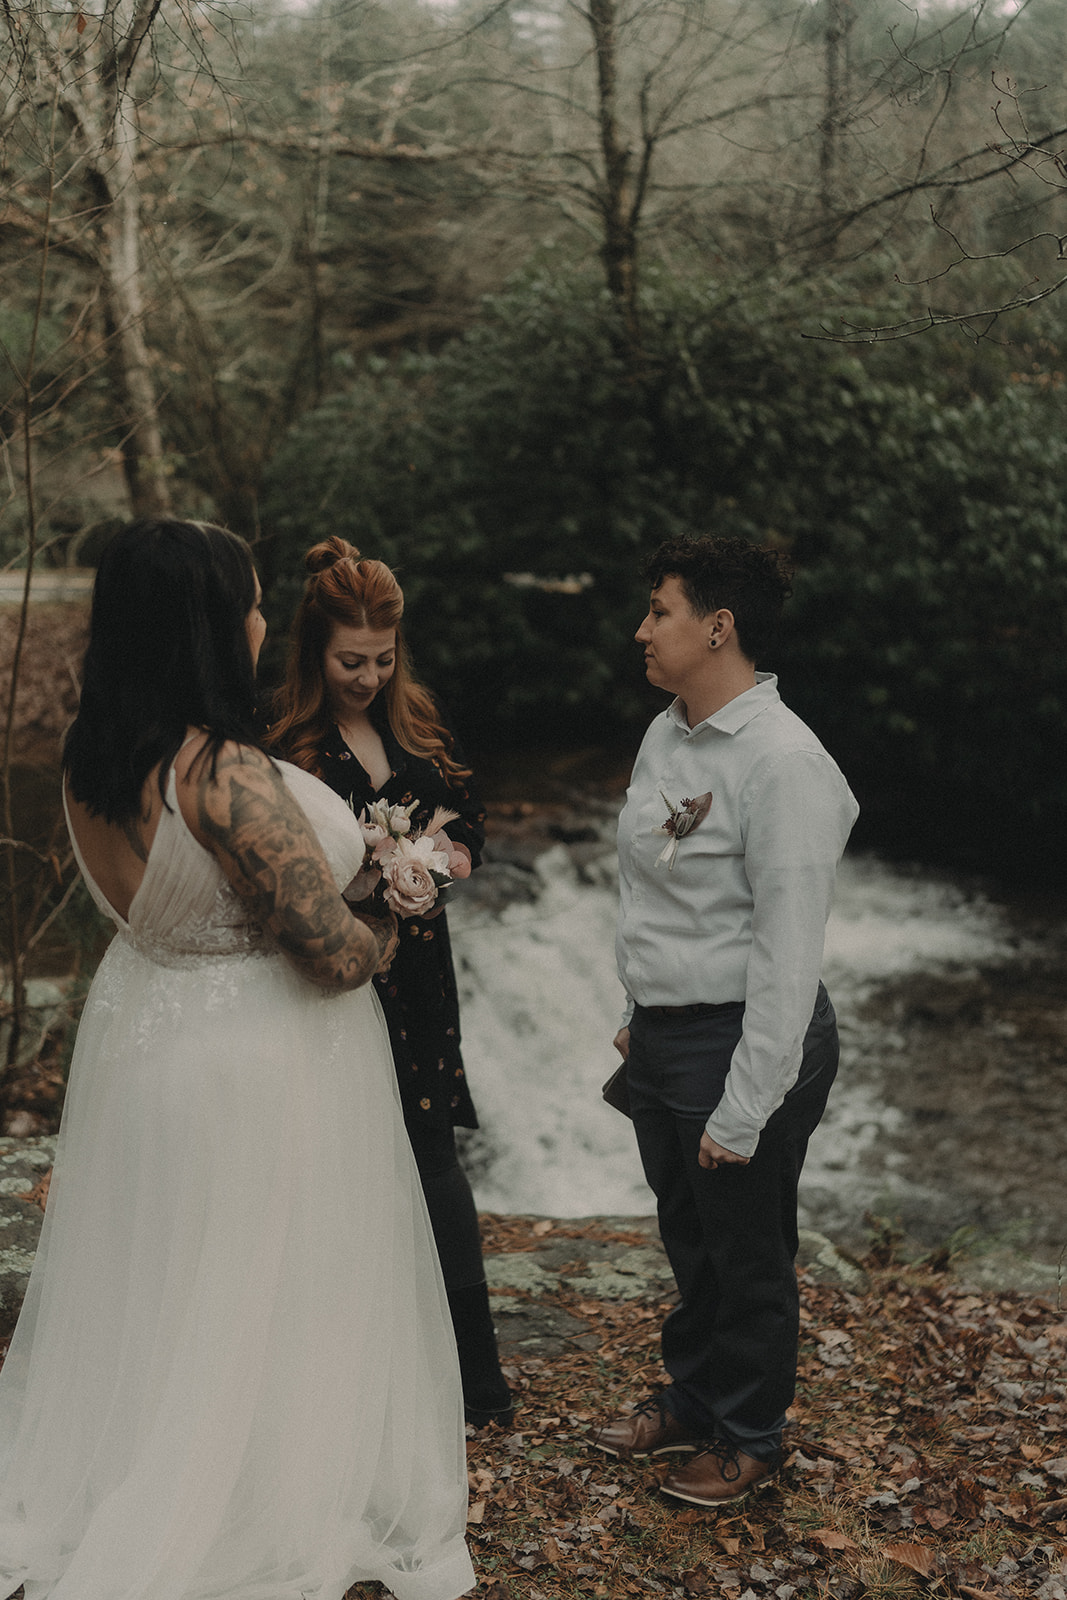 Romantic Elopement Ceremony Surrounded by Pocono Mountain Greenery